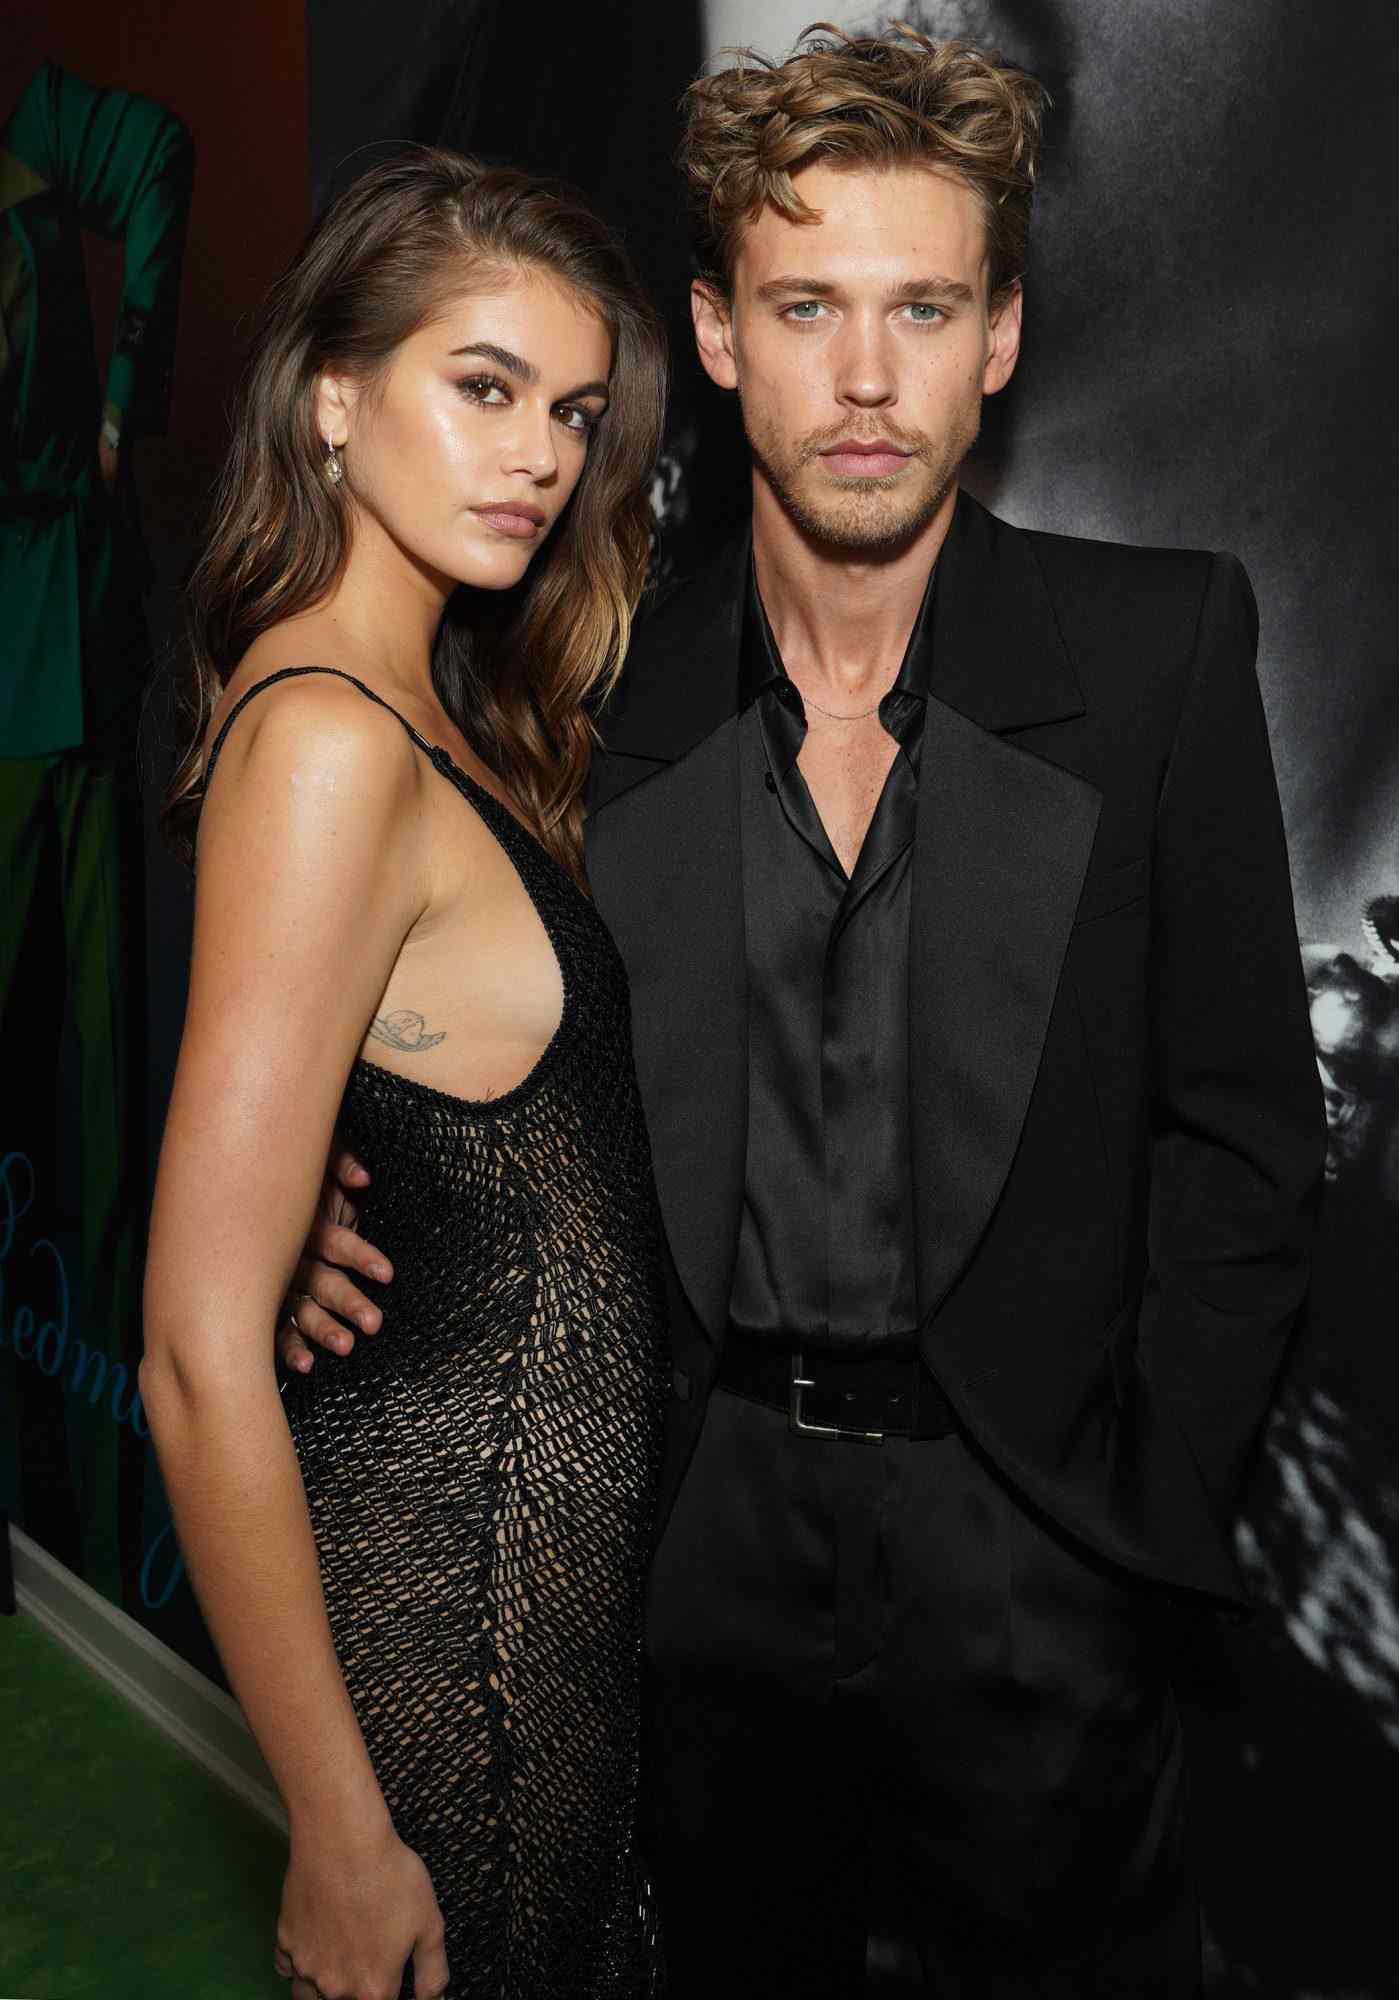 LOS ANGELES, CALIFORNIA - FEBRUARY 24: (L-R) Kaia Gerber and Austin Butler attend W Magazine's Annual Best Performances Party at Chateau Marmont on February 24, 2023 in Los Angeles, California. (Photo by Presley Ann/Getty Images for W Magazine)